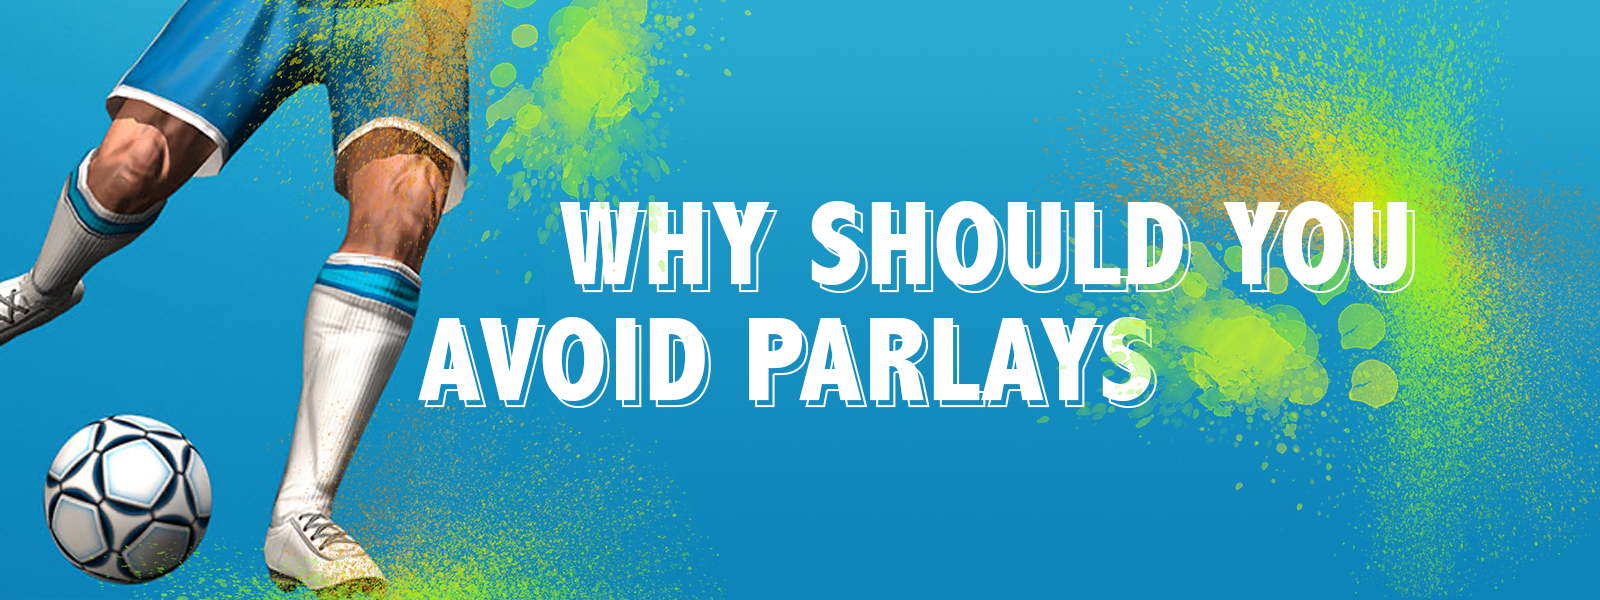 Learn Why Should You Avoid Parlays